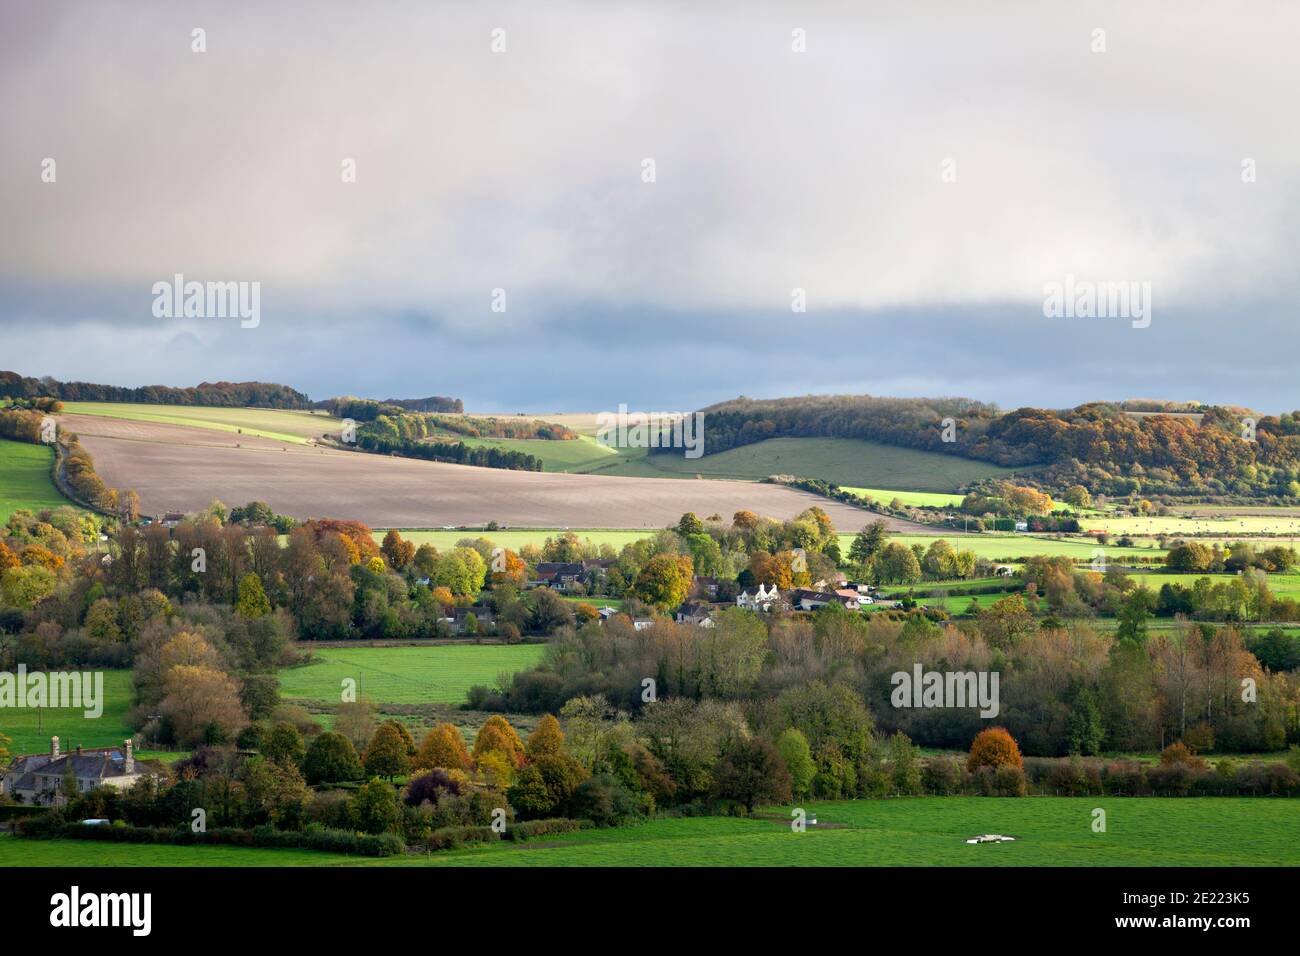 An autumn view of the village of Upton Lovell, in the Wylye Valley near Warminster in Wiltshire. Stock Photo